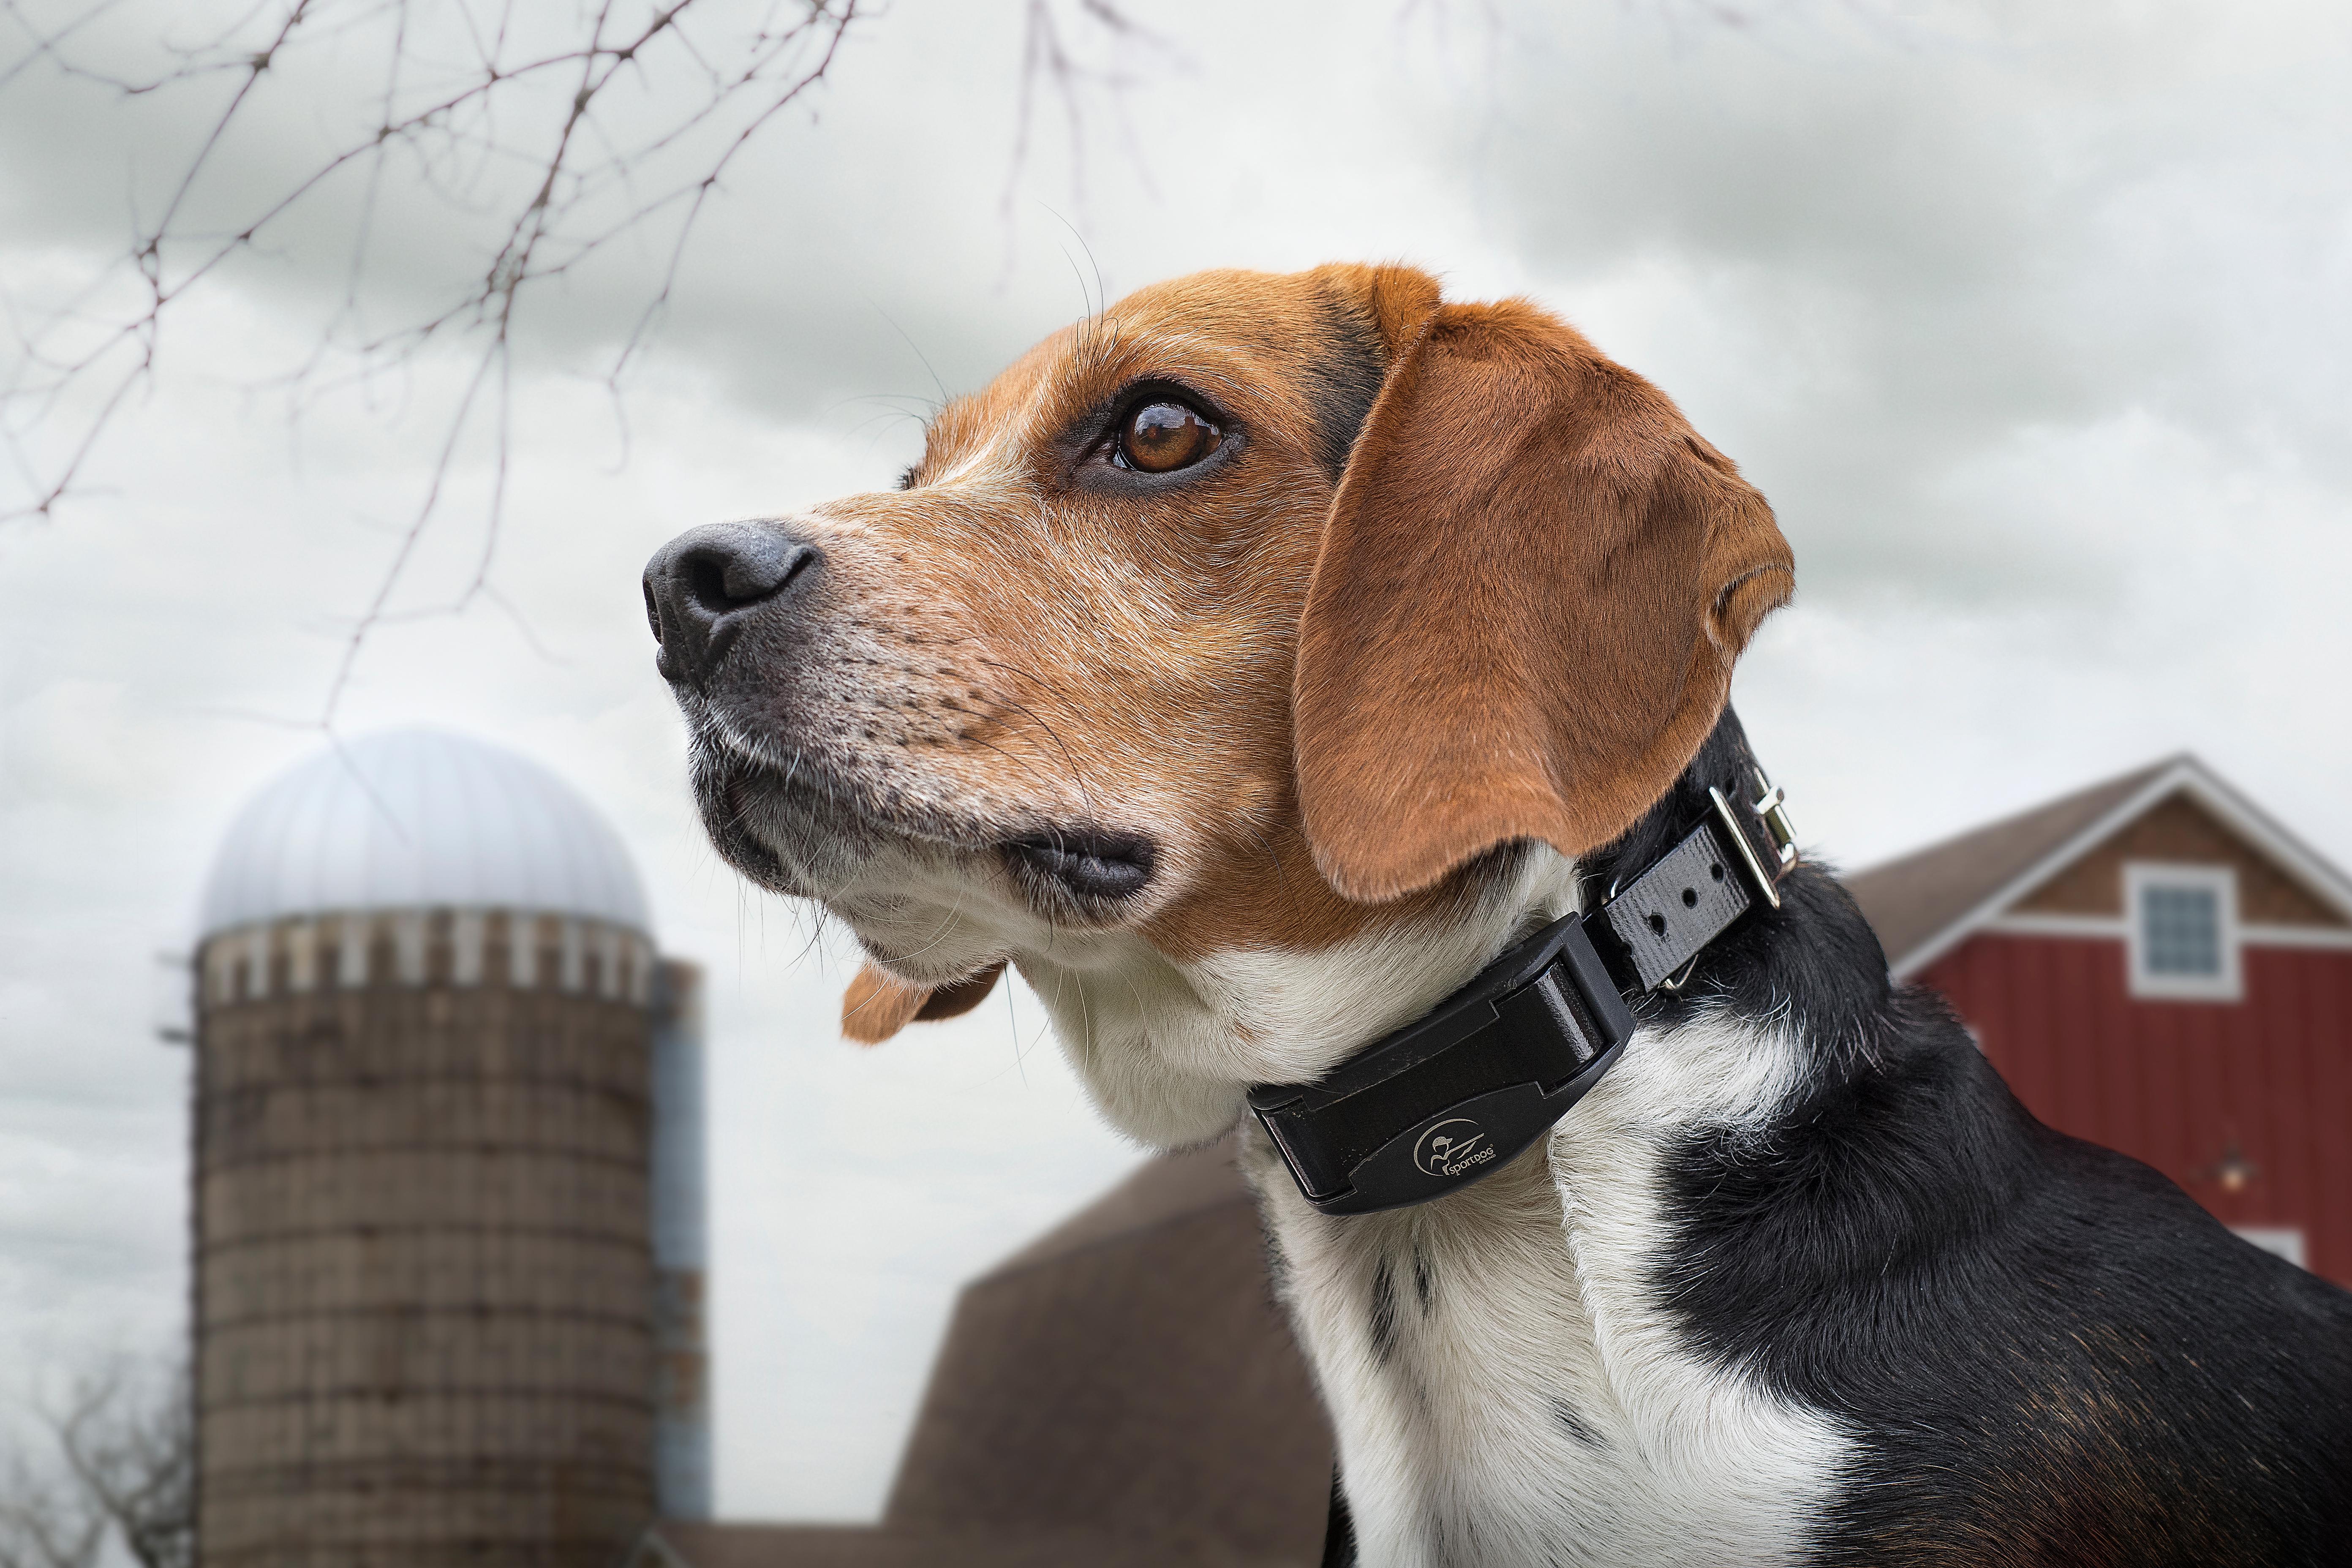 Beagle being quiet with bark collar on. Barn in the background.